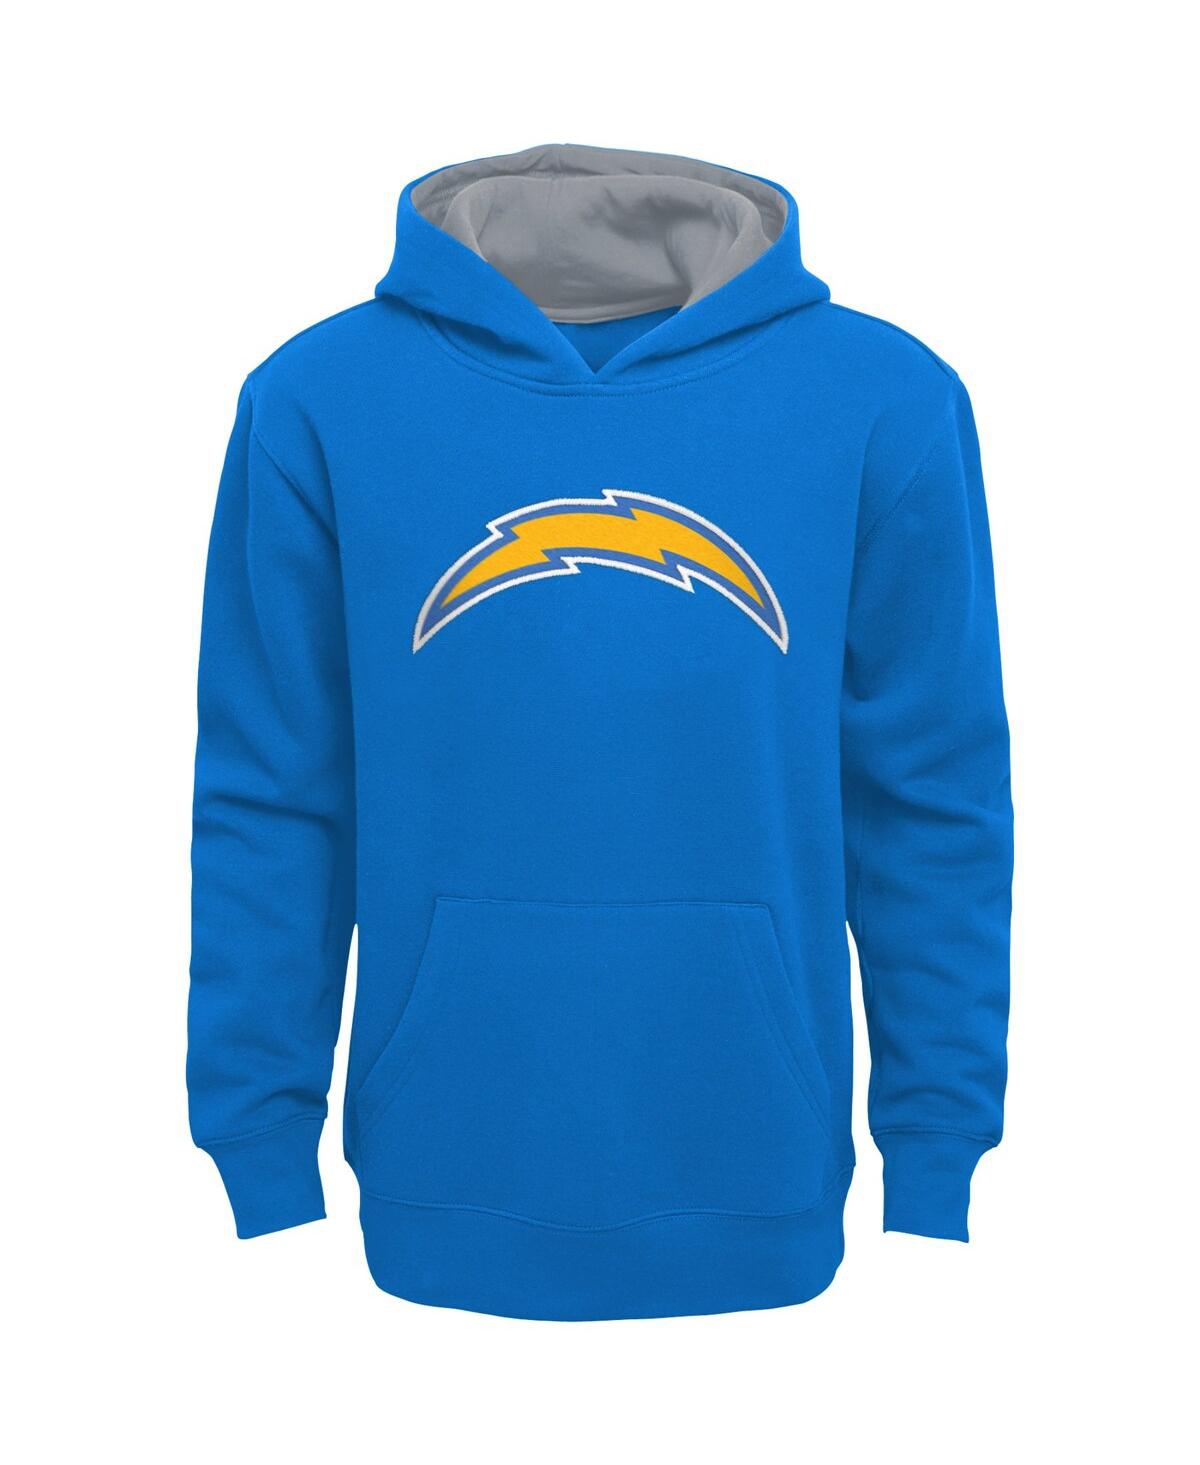 Outerstuff Babies' Preschool Boys And Girls Blue Los Angeles Chargers Prime Pullover Hoodie